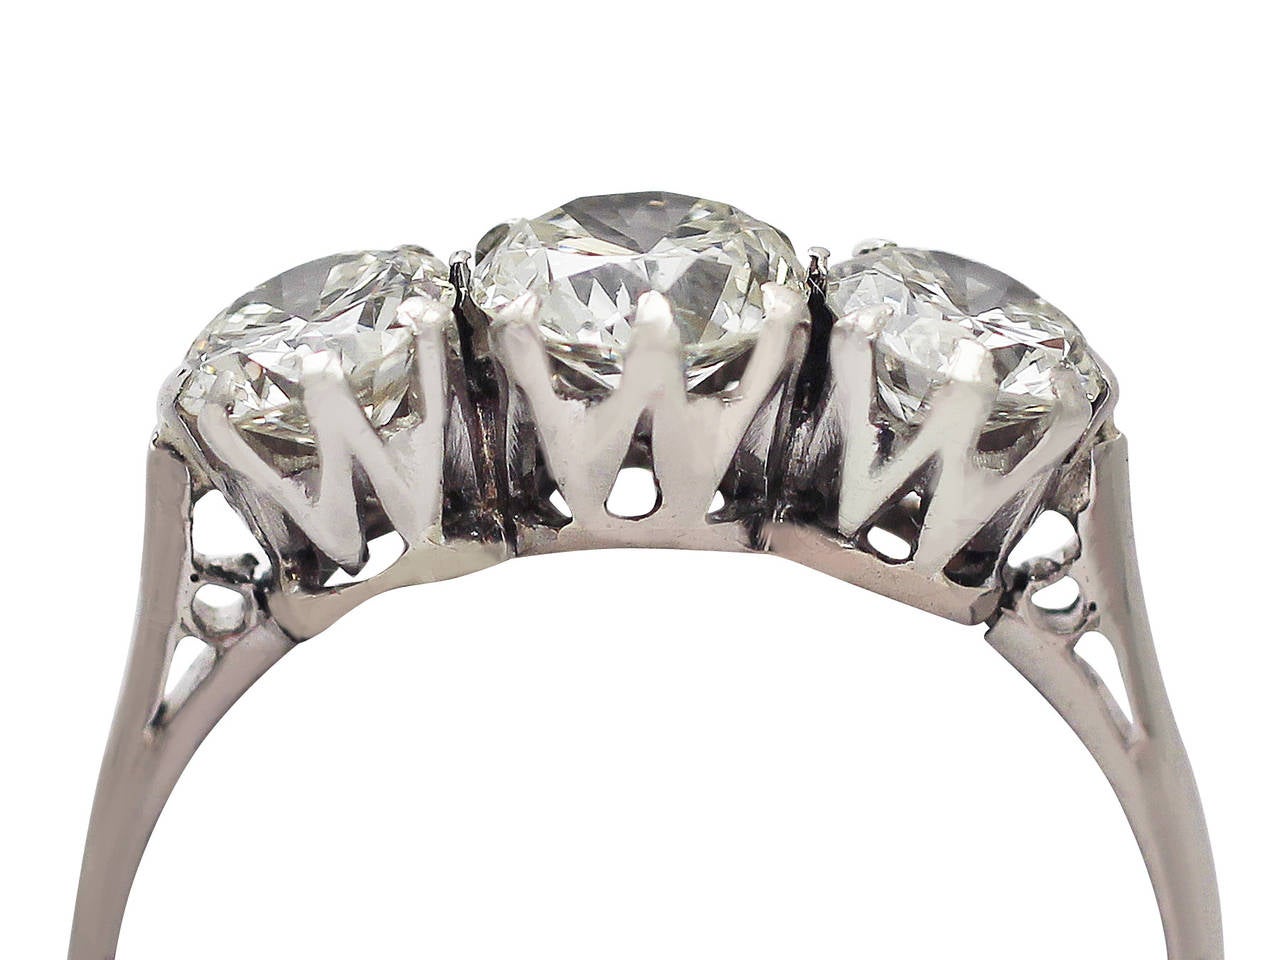 A stunning, fine and impressive antique 1.50 carat diamond and platinum three stone/trilogy ring; part of our antique jewellery and estate jewelry collections.

This stunning diamond trilogy ring has been crafted in platinum.

The pierced decorated